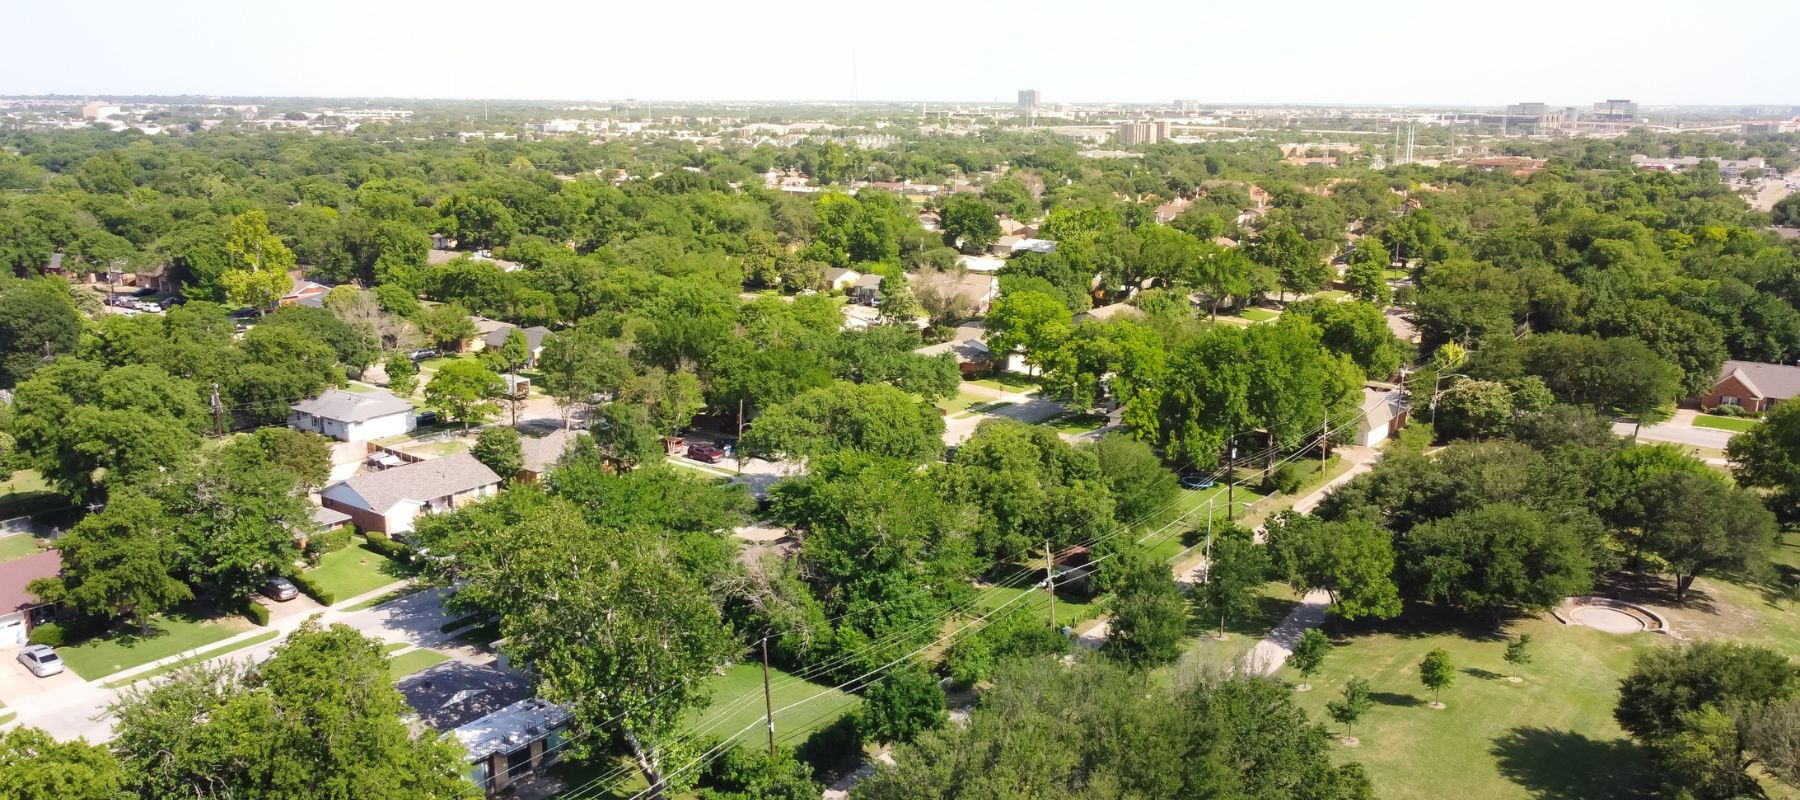 aerial view of a very lush Plano, TX neighborhood with many green trees